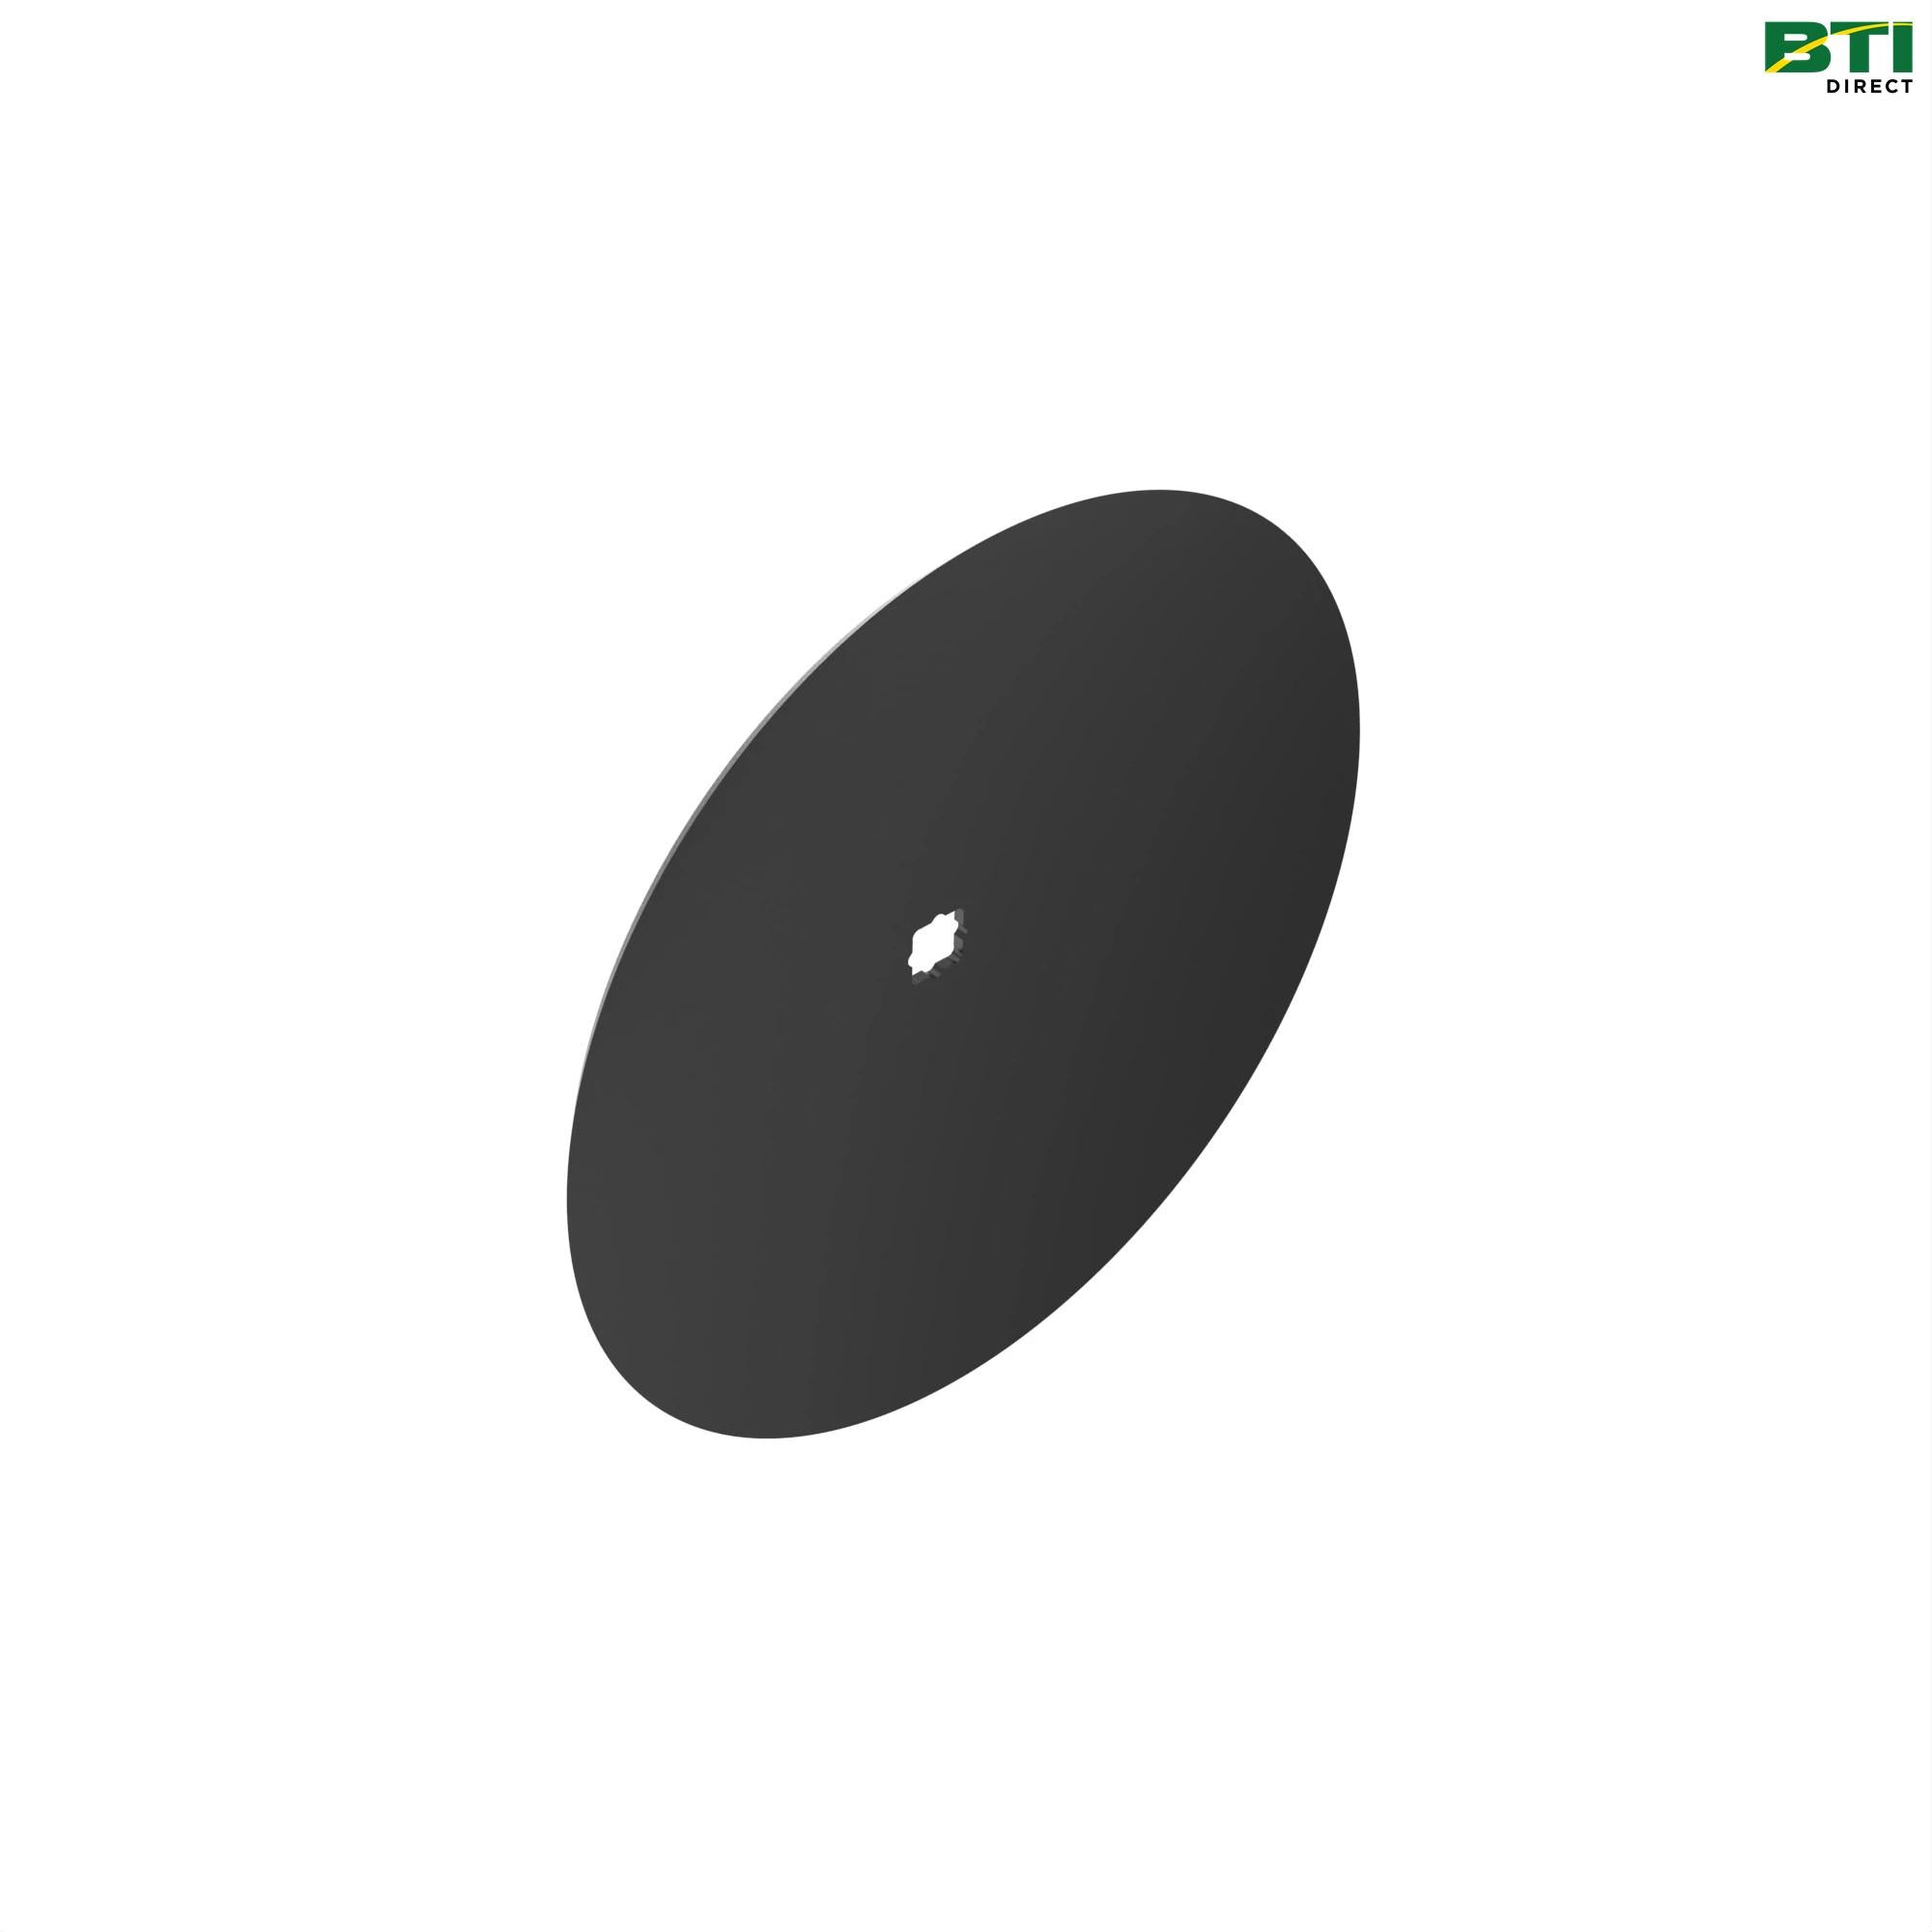 A47237: Solid Spherical Disk